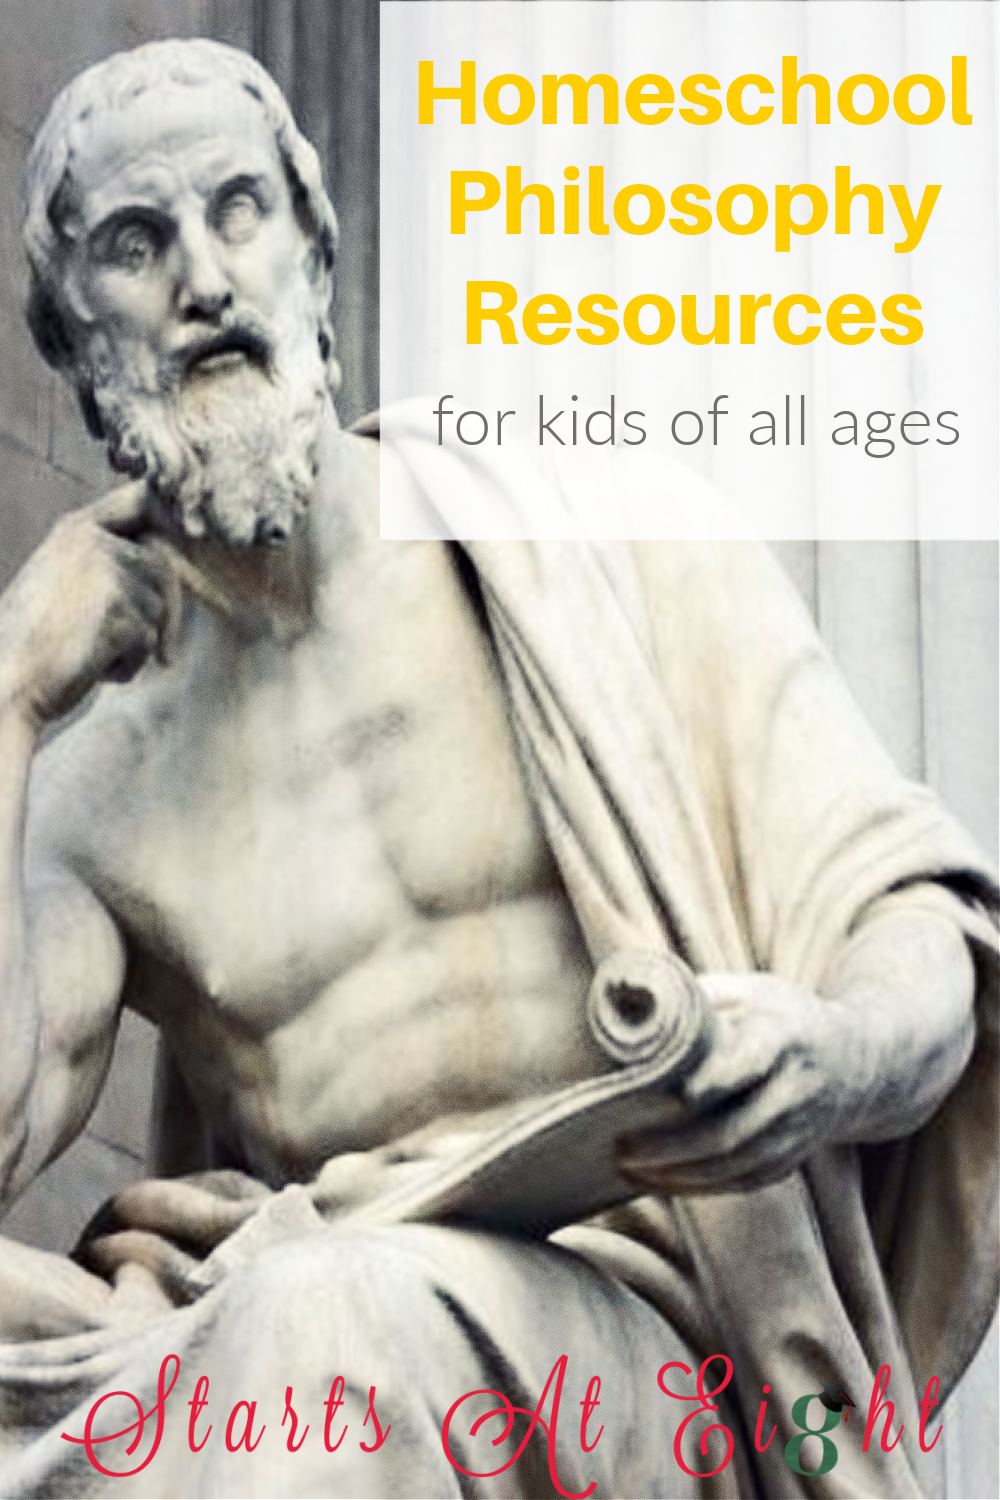 This is a collection of Homeschool Philosophy Resources for kids of all ages. Starting in elementary school, through high school and even college!